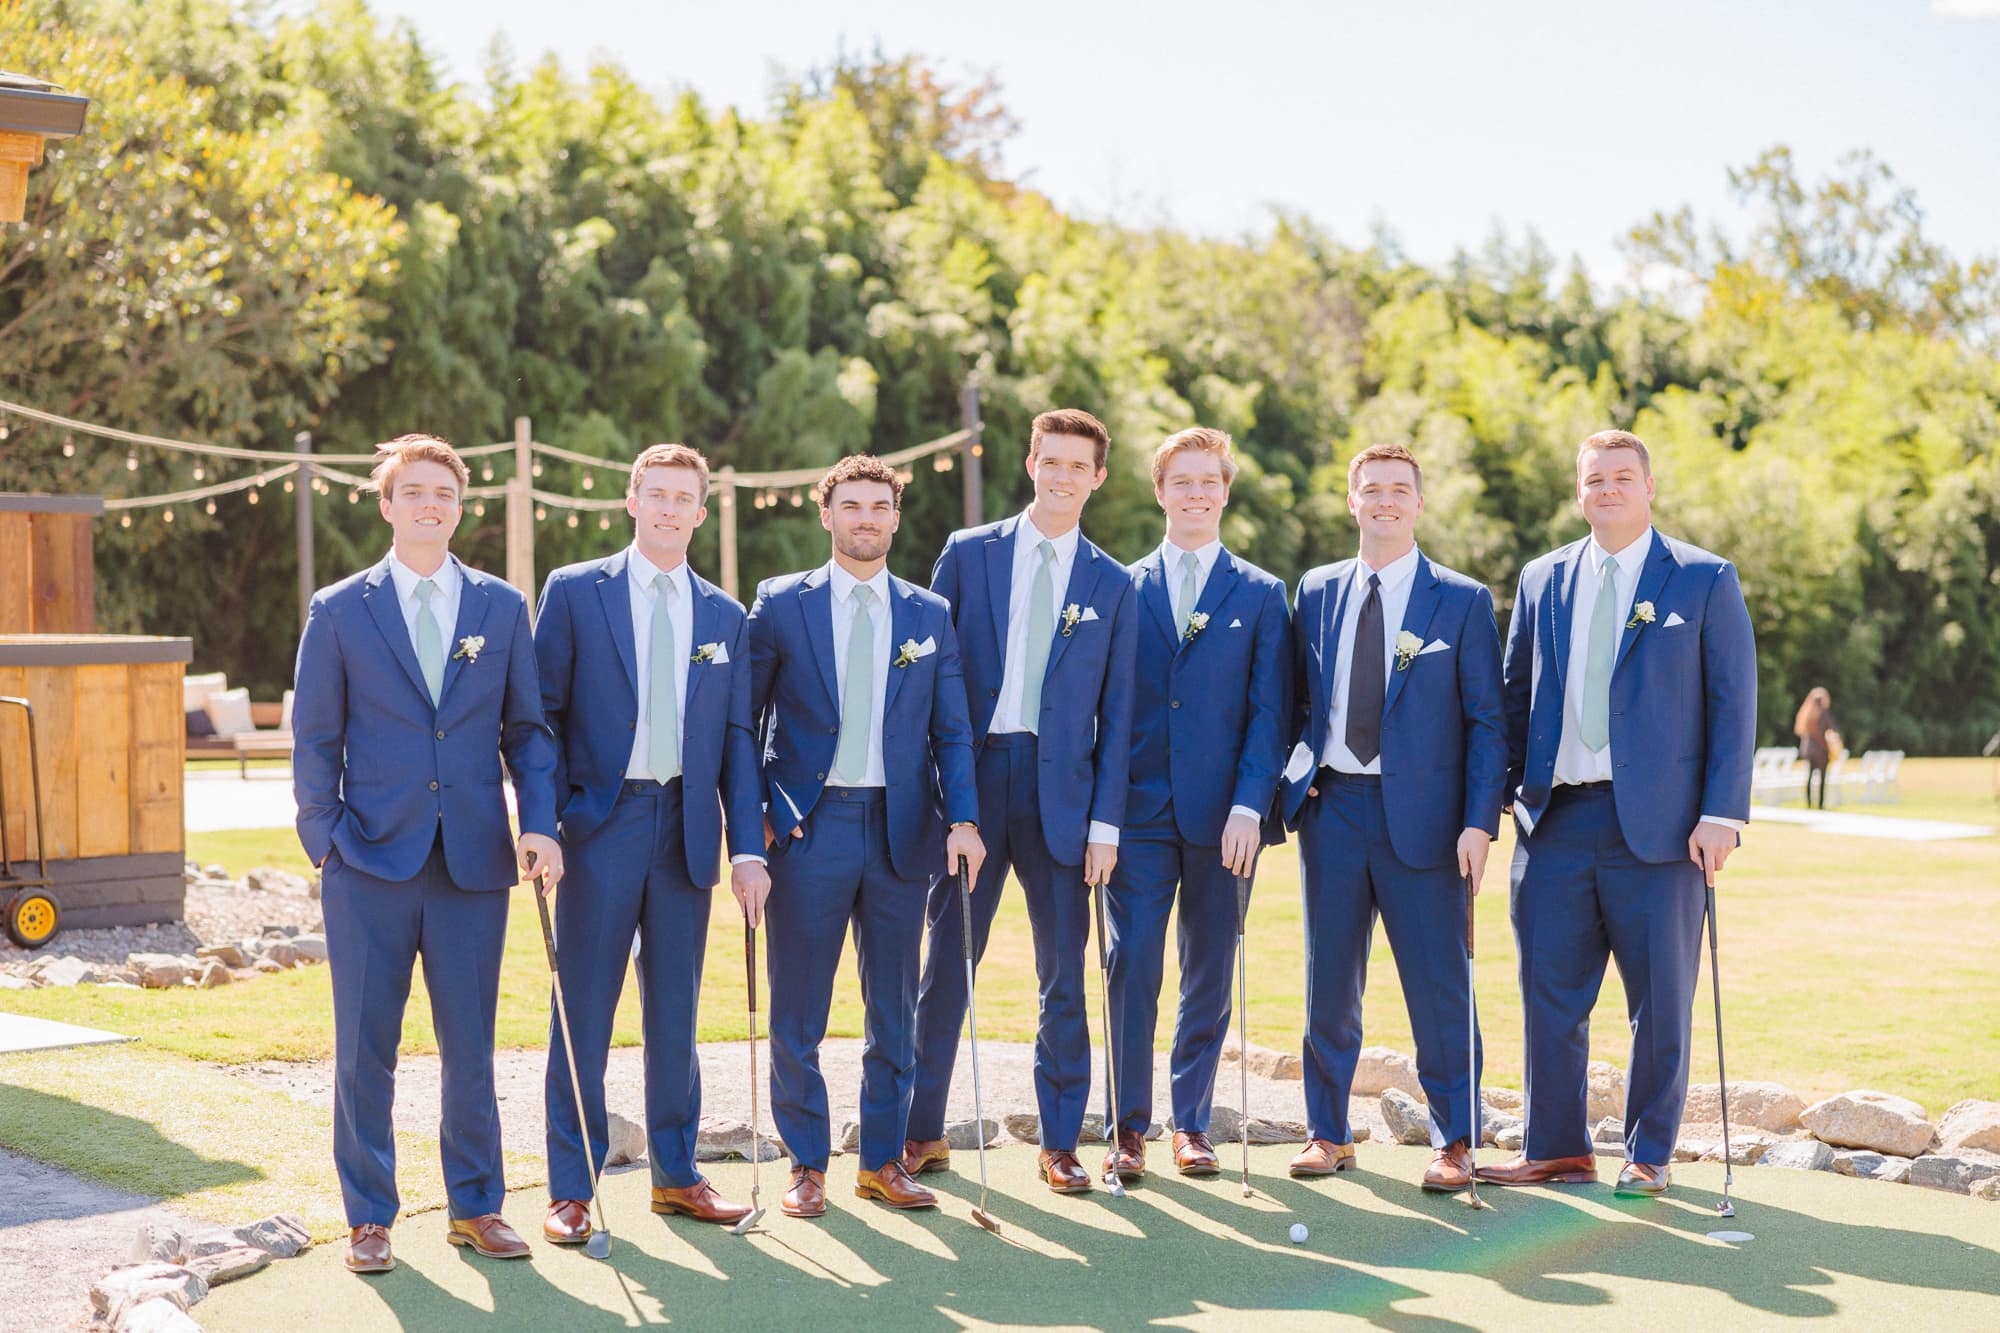 Conor and his groomsmen enjoy the mini golf course at the barn wedding venue.